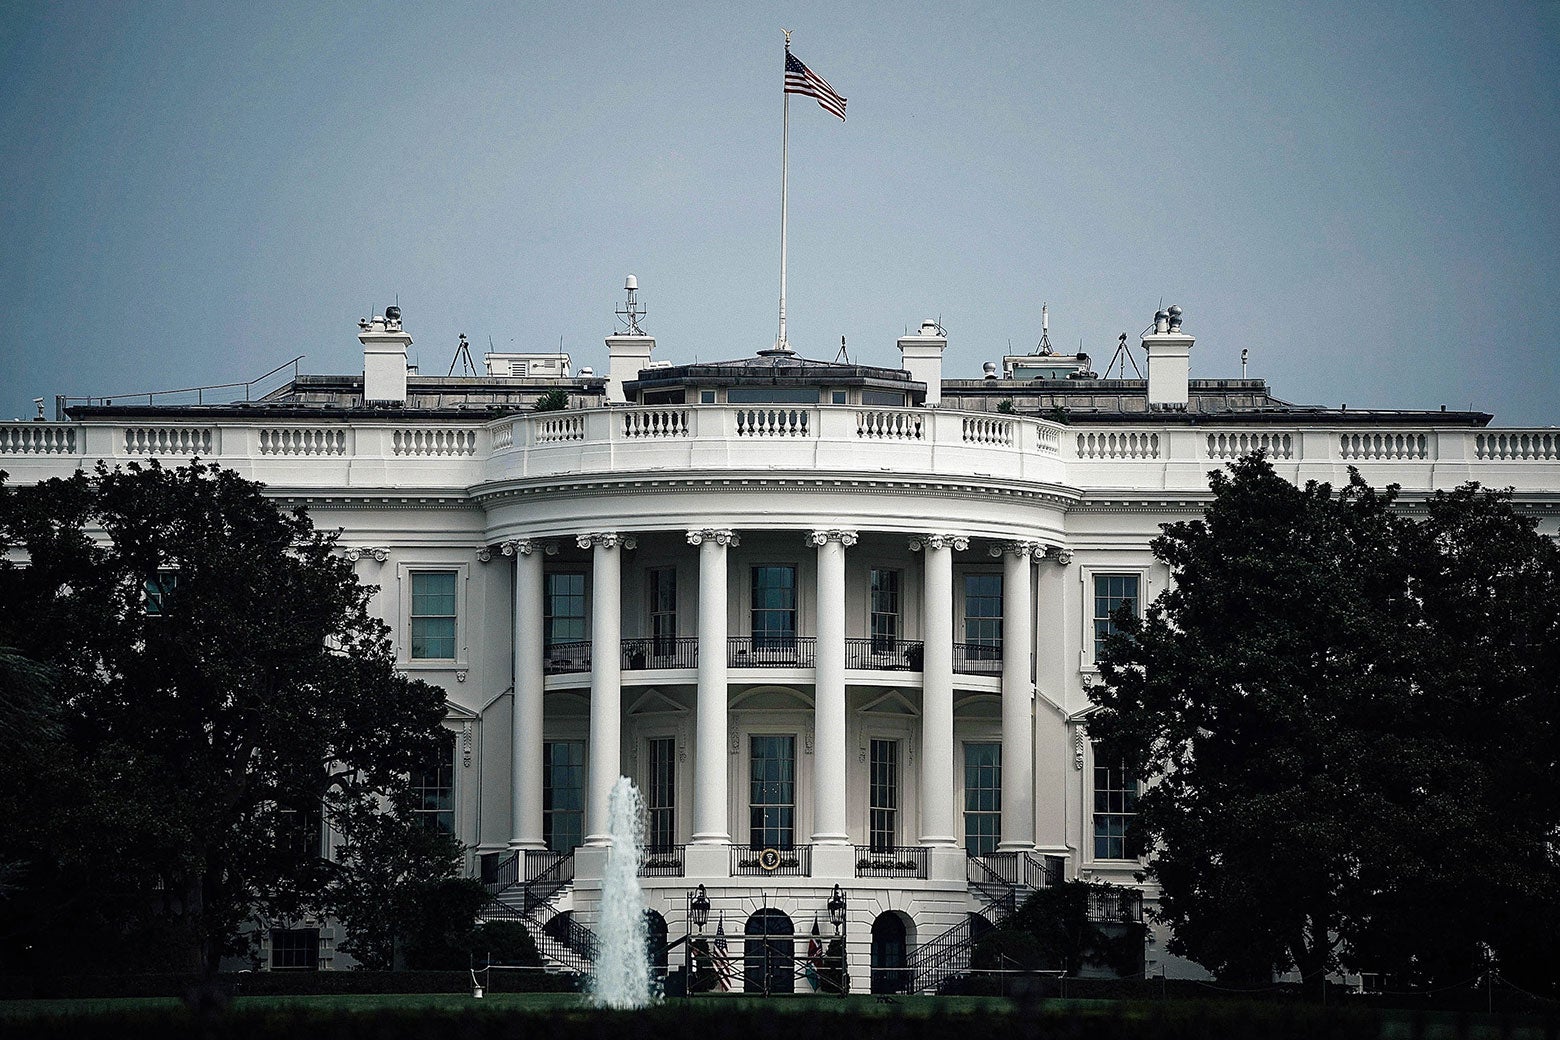 The White House with a flag on top, flown at full staff.